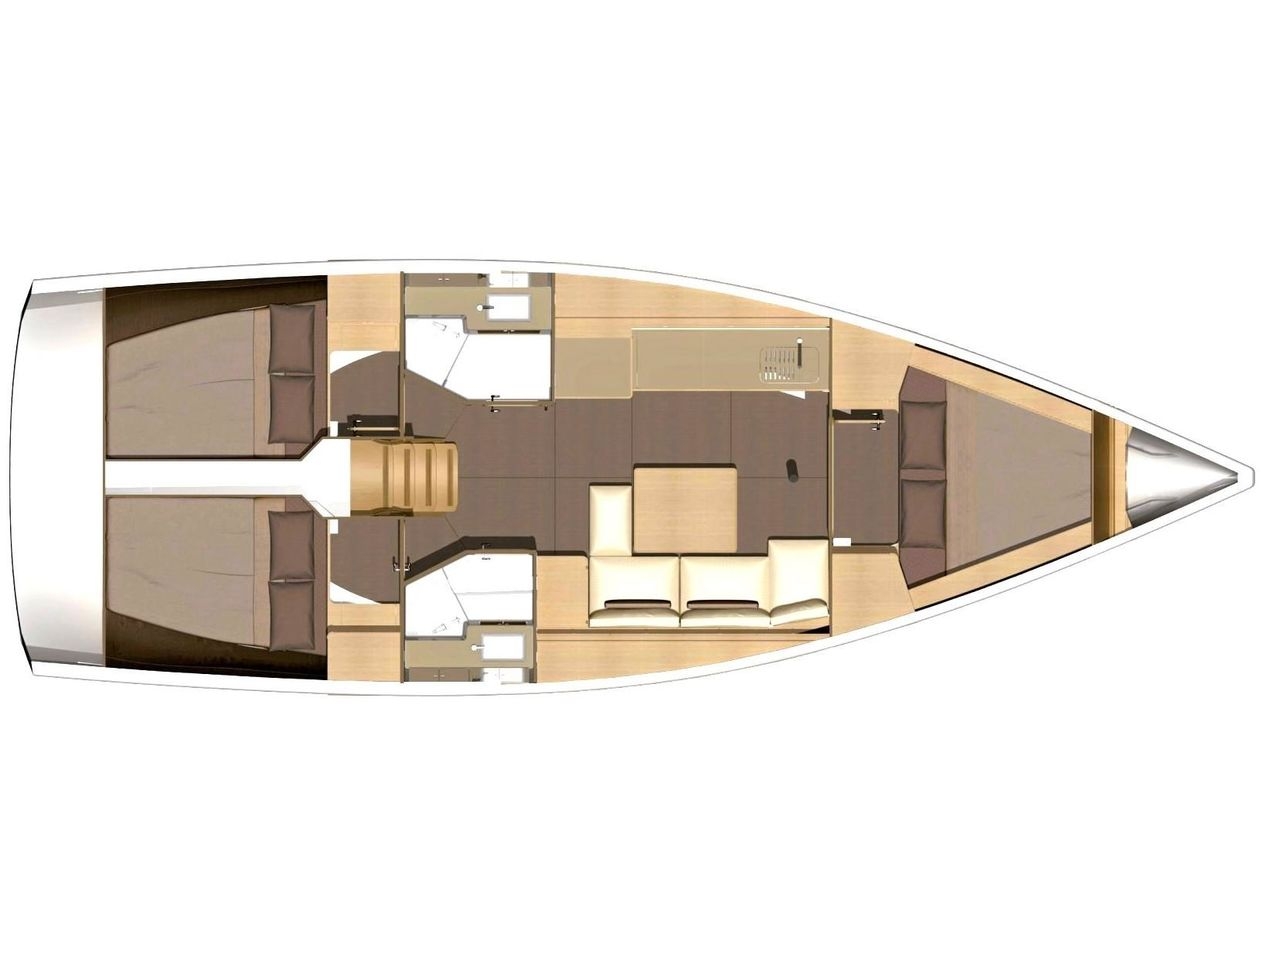 Floor plan image for yacht Dufour 382 Grand Large - Les Troyens